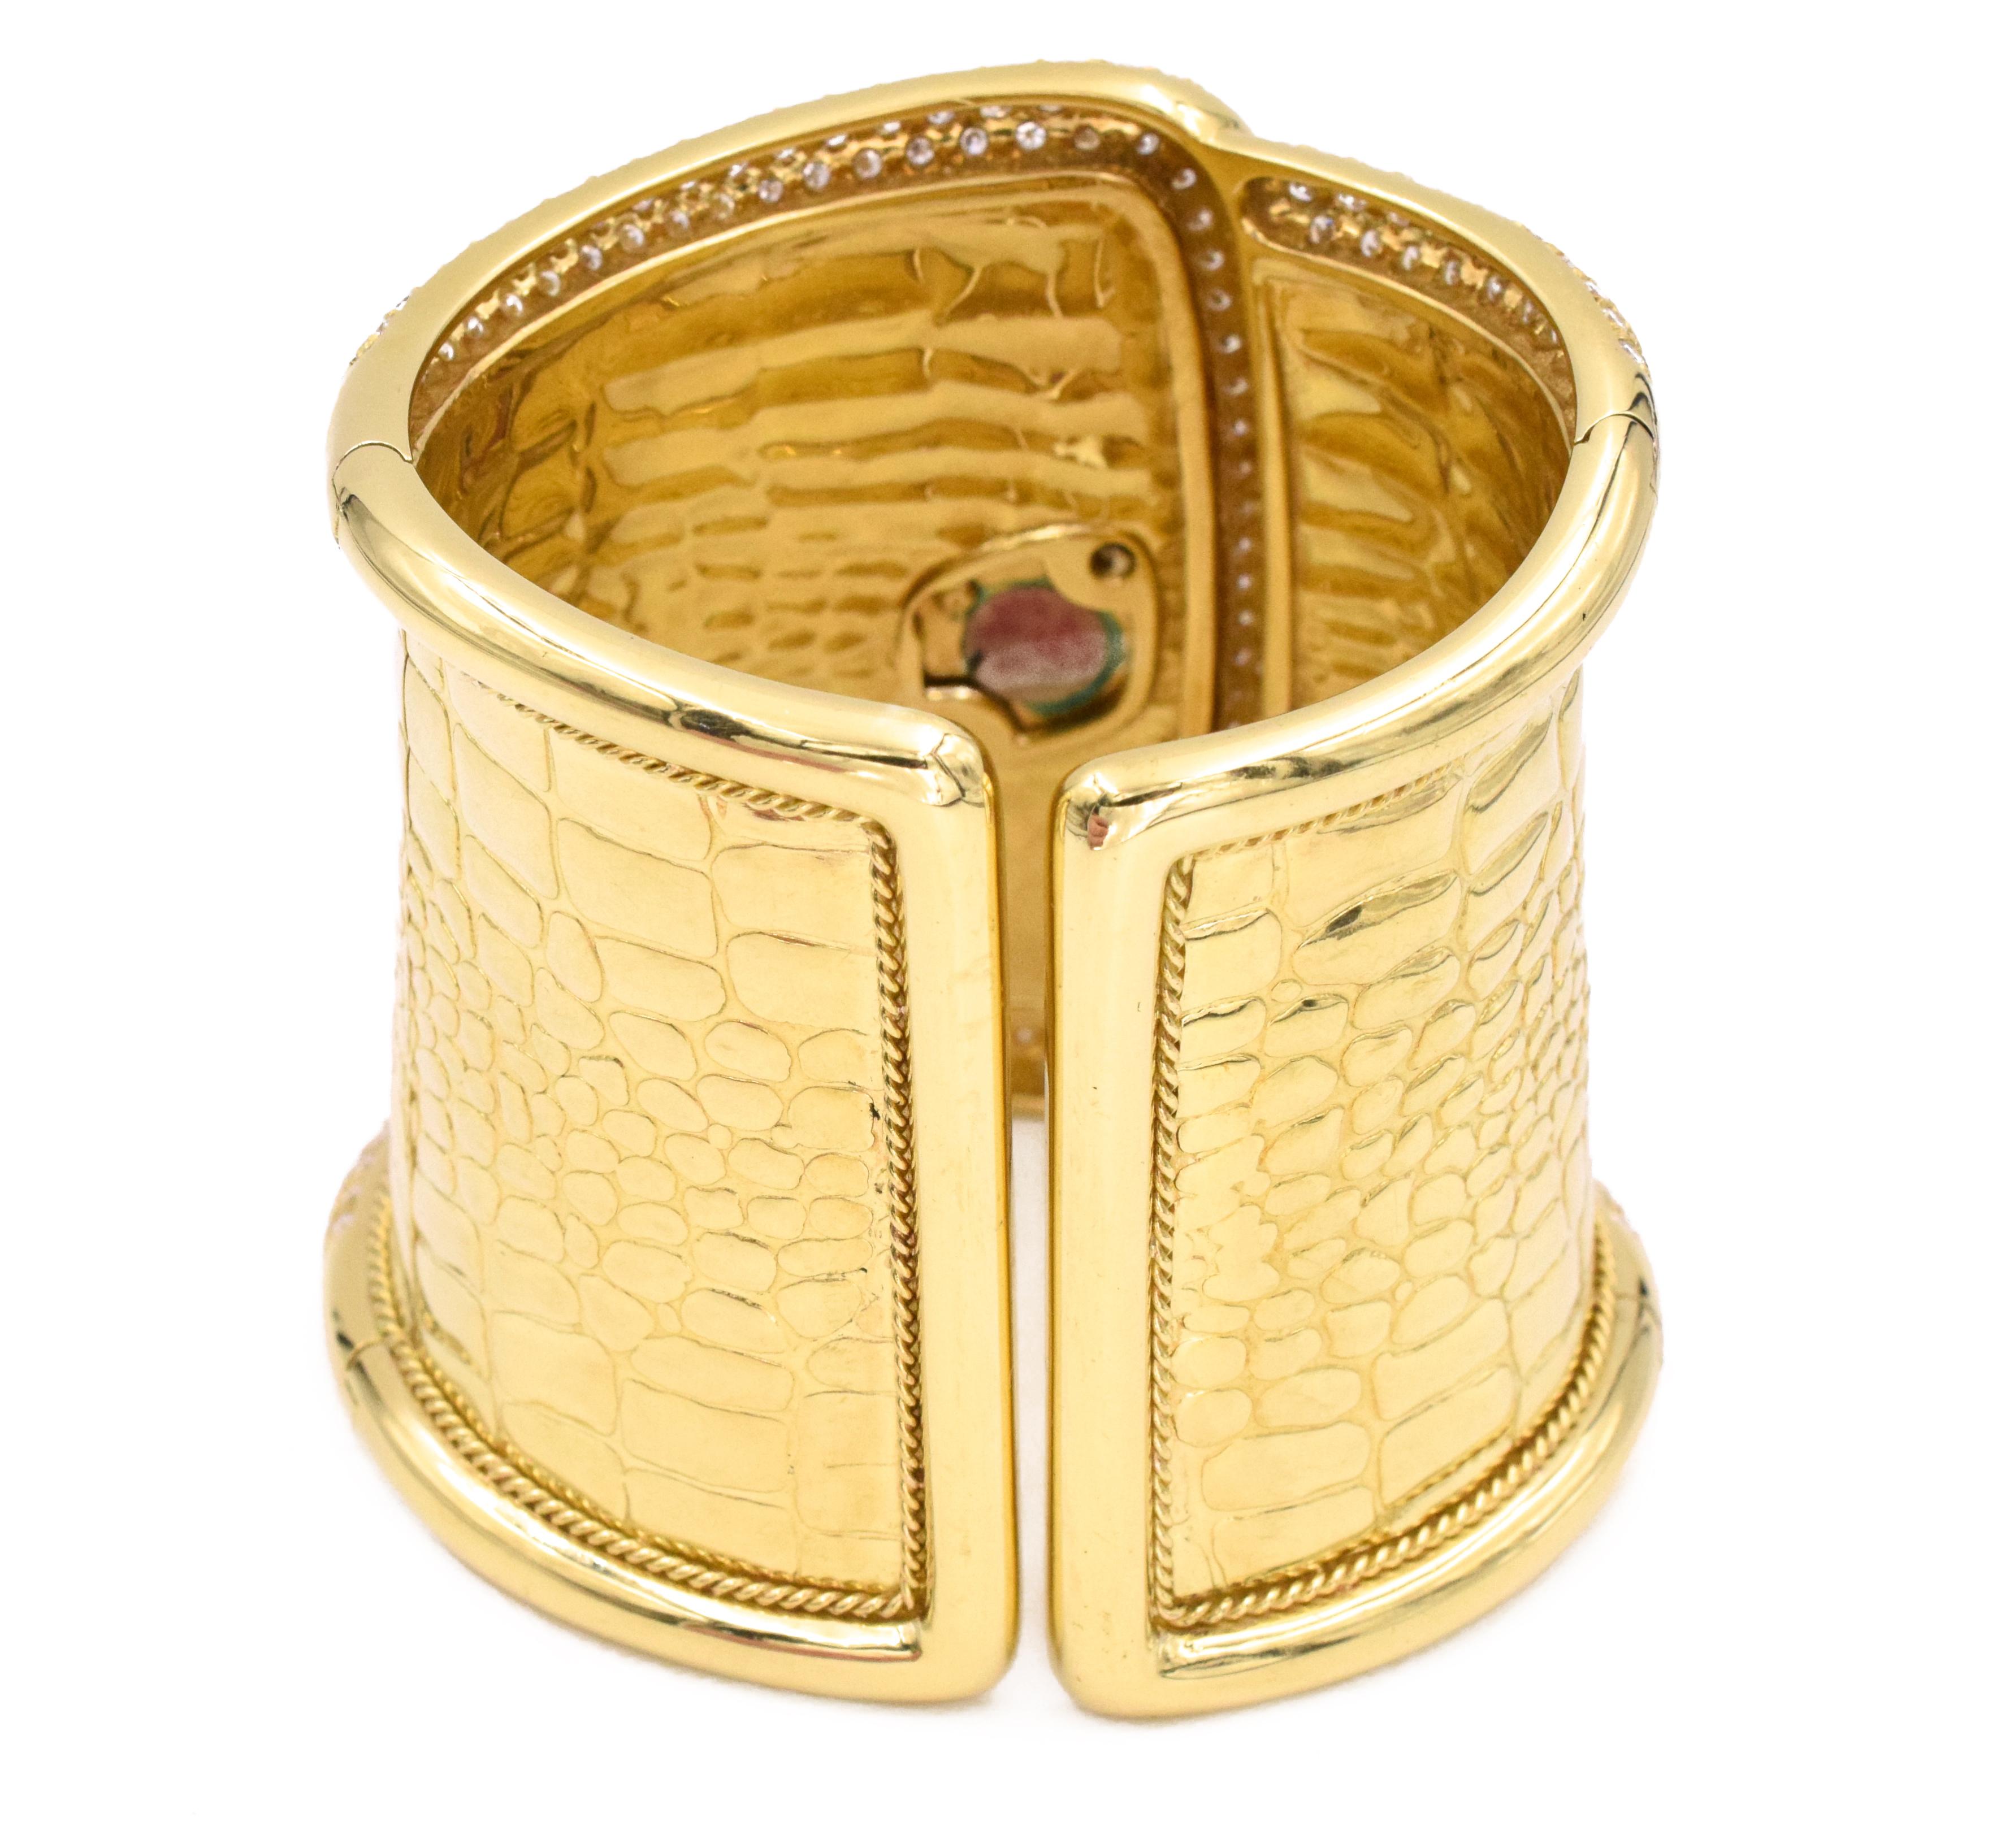 Etoile diamond cuff watch made in 18k yellow gold. The front half of the cuff around the edges, face of the watch, halo and leaf designs around the watch are pave set with round brilliant cut diamonds. Accented with larger marquise and pear shape